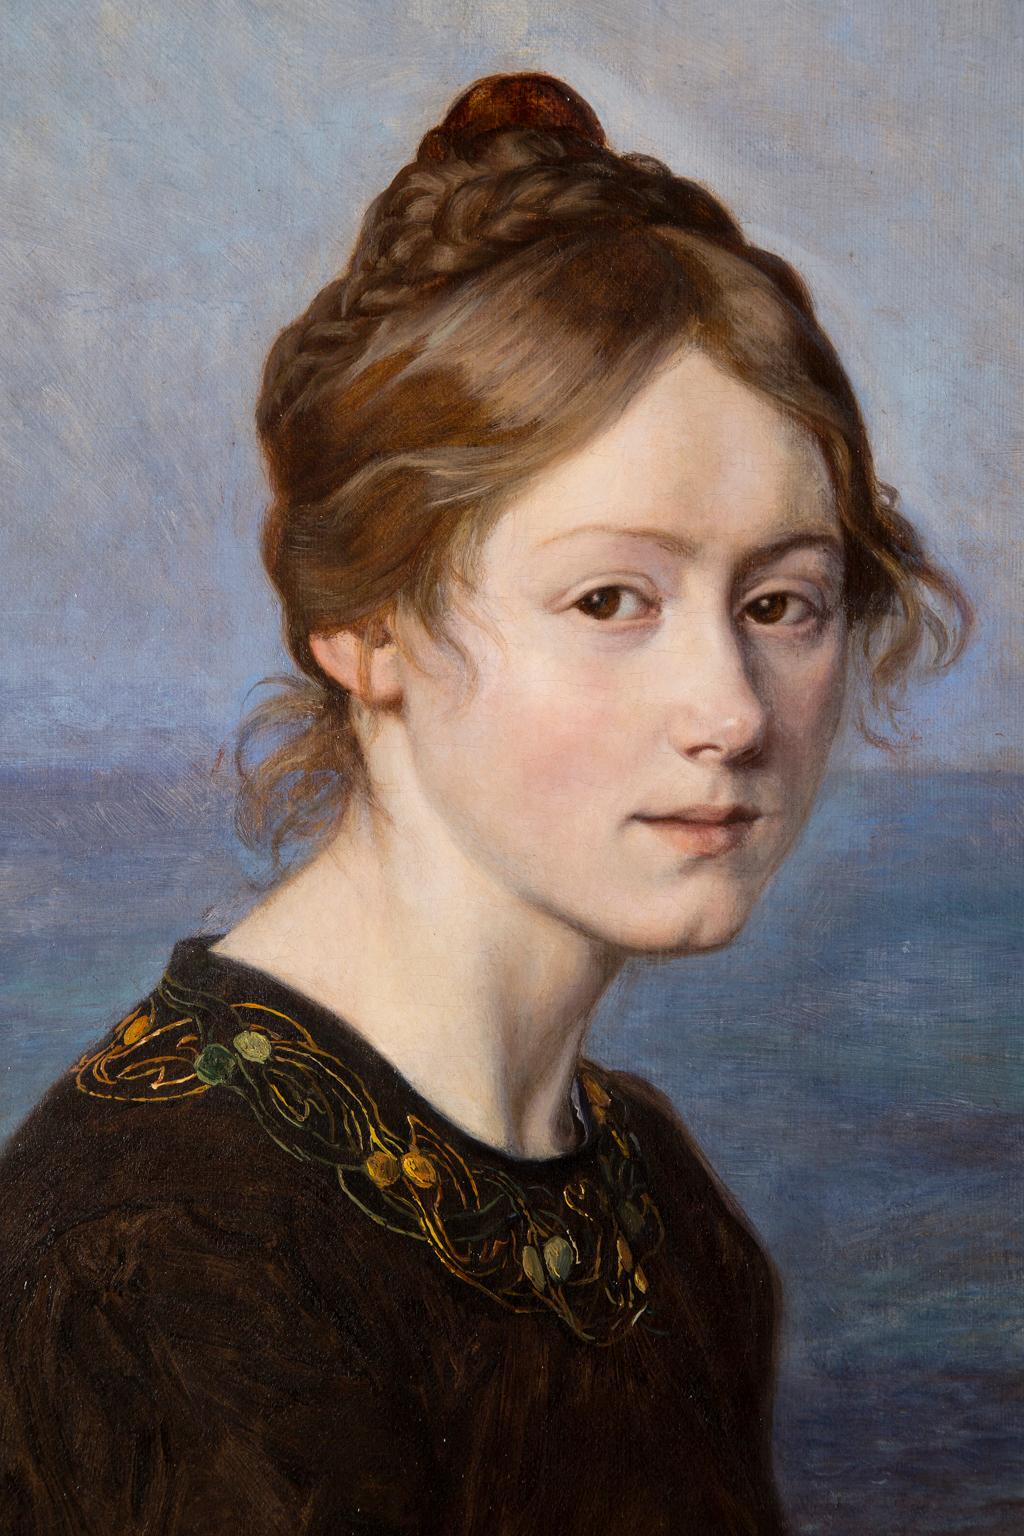 SALE ONE WEEK ONLY

“Benedicte Olrik” is the portrait of Benedicte Olrik the 18 year-old daughter of another famous artist, Ole Henrik Benedictus Olrik (1830 – 1890) and future wife of 20th century Danish architect Carl Brummer. This is an intimate